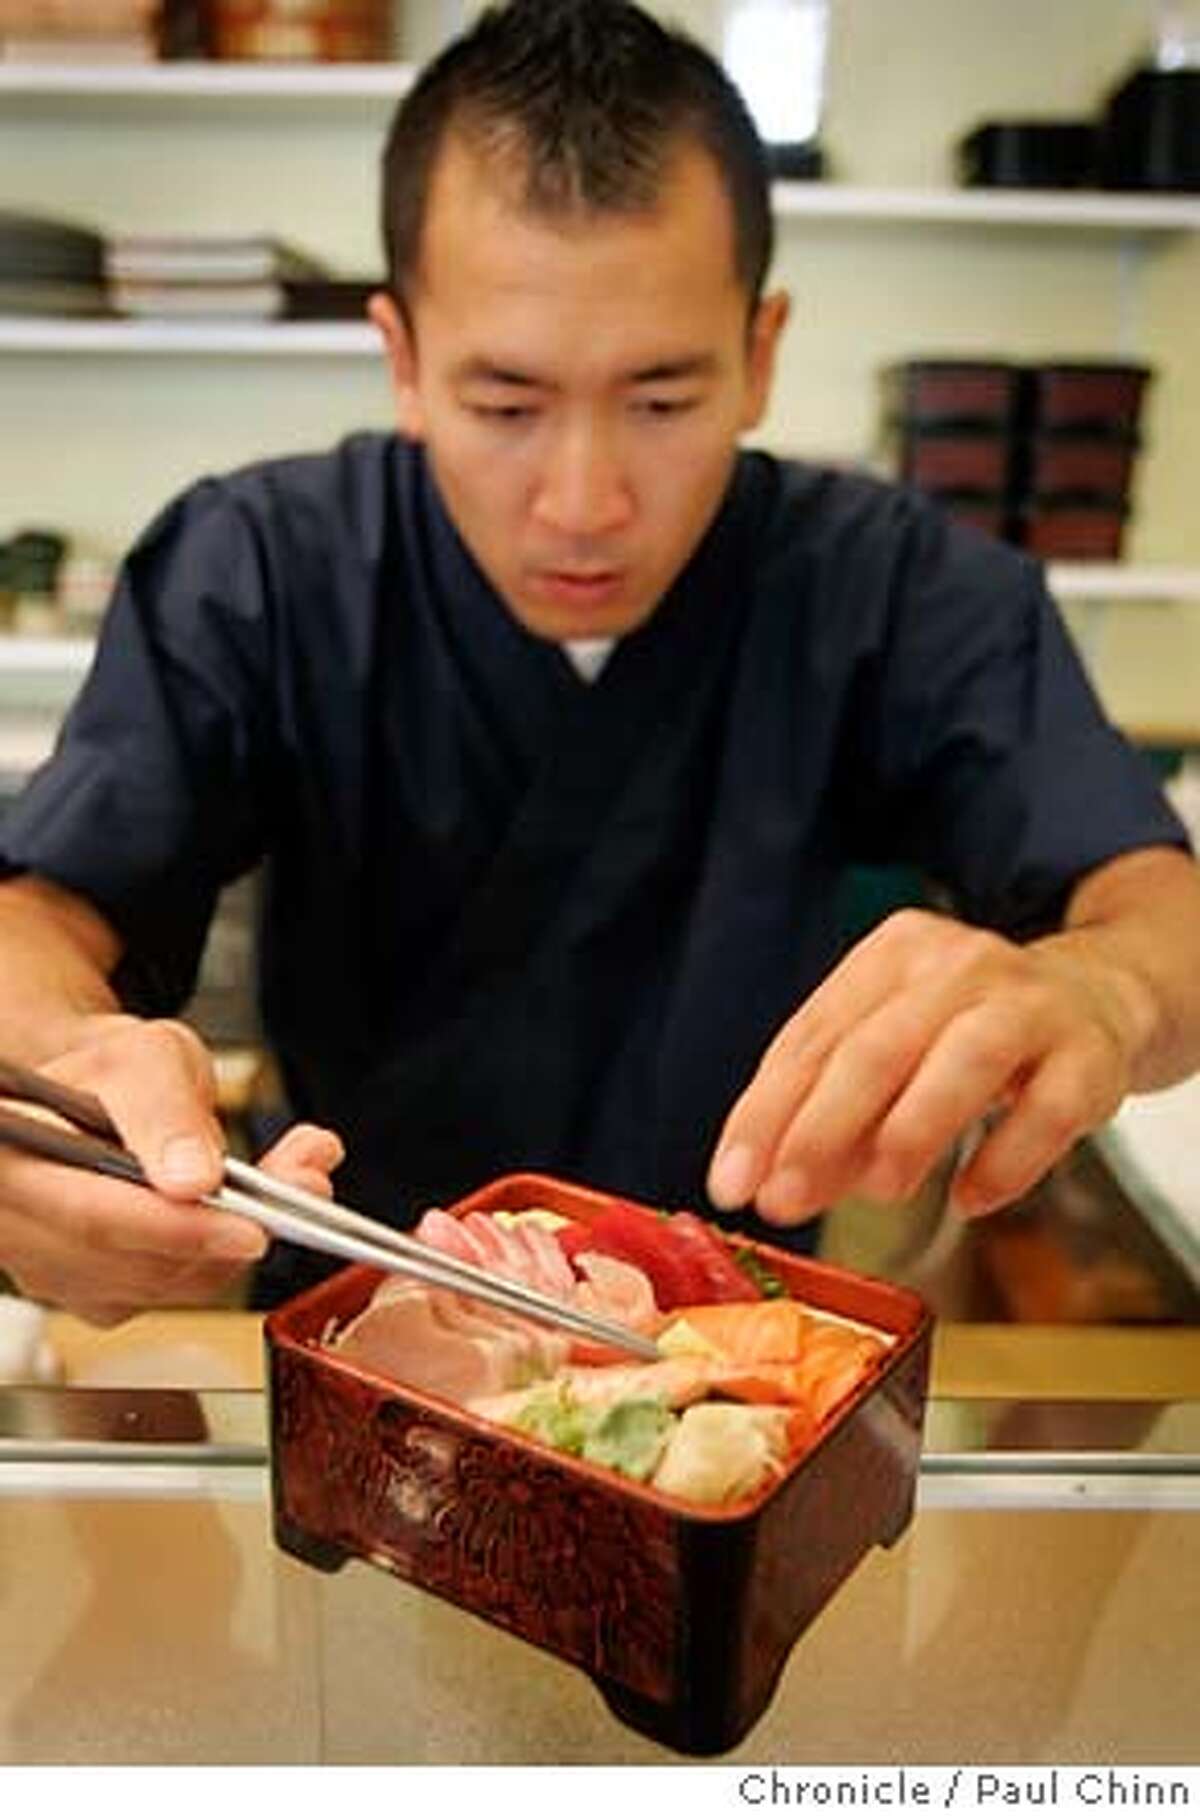 Chef Sean Buyan adds the finishing touches to an order of chirashi sushi at Musashi Japanese restaurant in Berkeley, Calif. on Tuesday, June 19, 2007. PAUL CHINN/The Chronicle **Sean Buyan MANDATORY CREDIT FOR PHOTOGRAPHER AND S.F. CHRONICLE/NO SALES - MAGS OUT